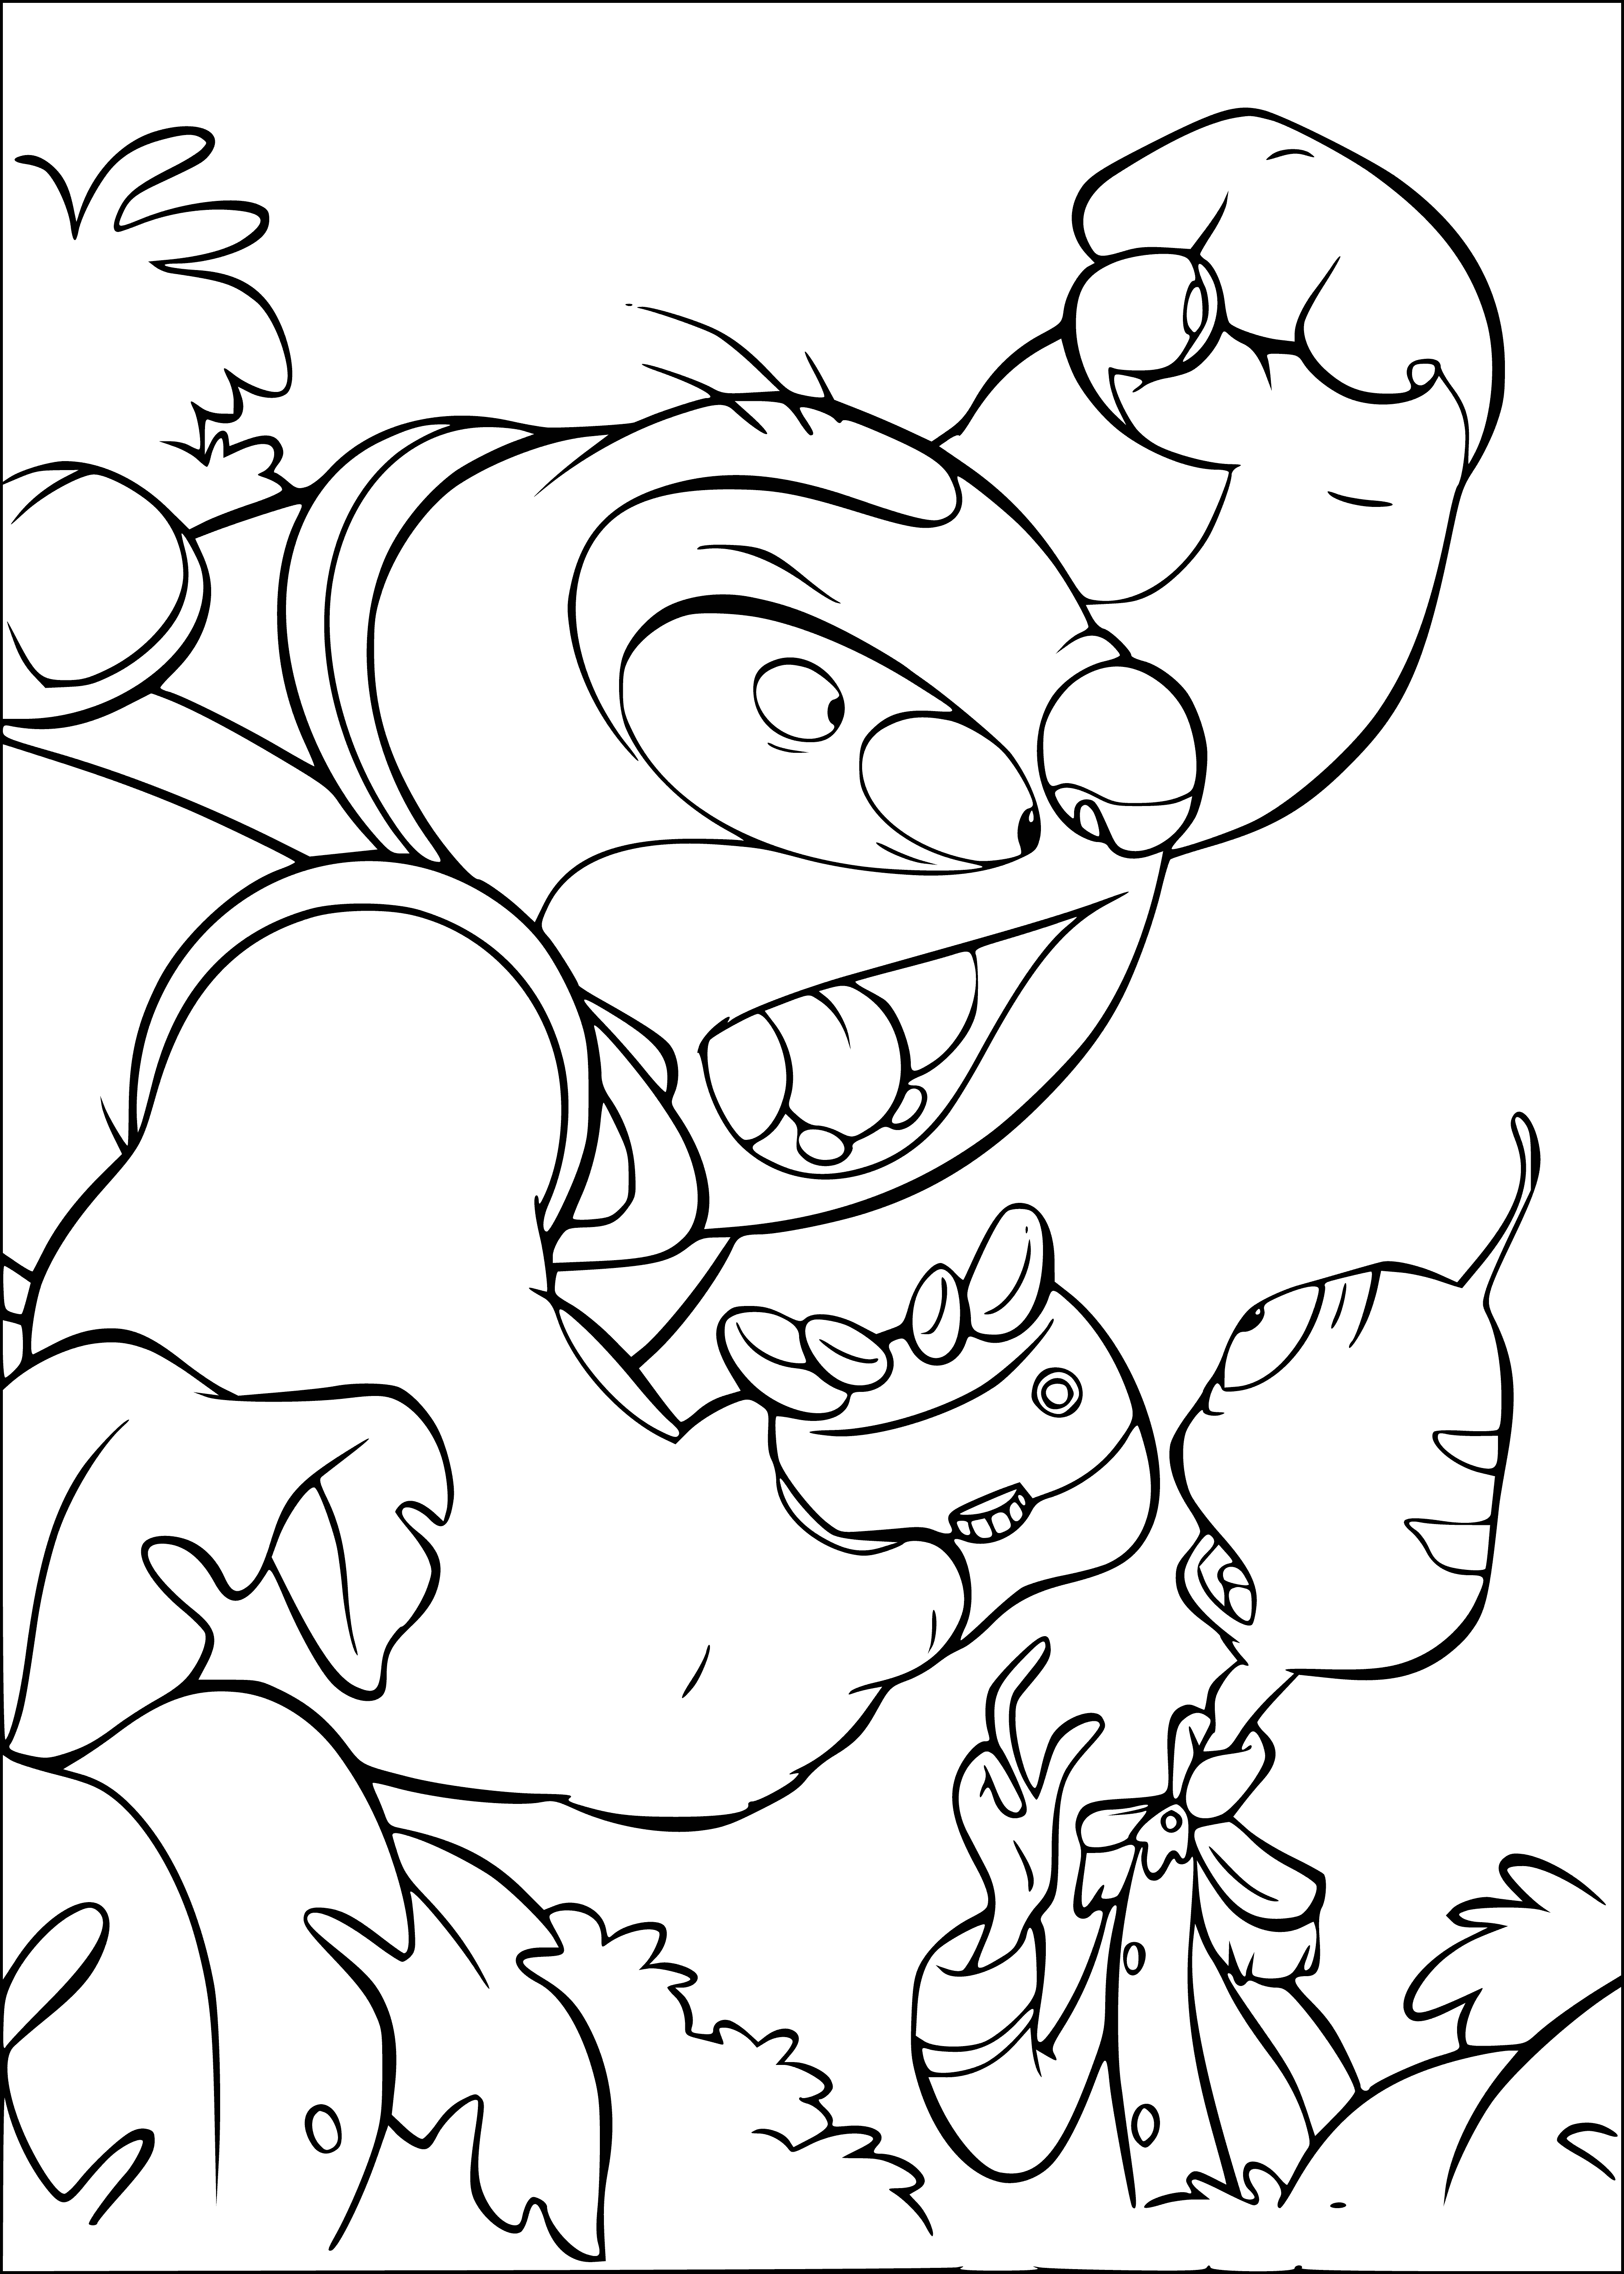 coloring page: Two creatures, blue fur, big eyes, four/two arms, two legs, holding each other, happy.